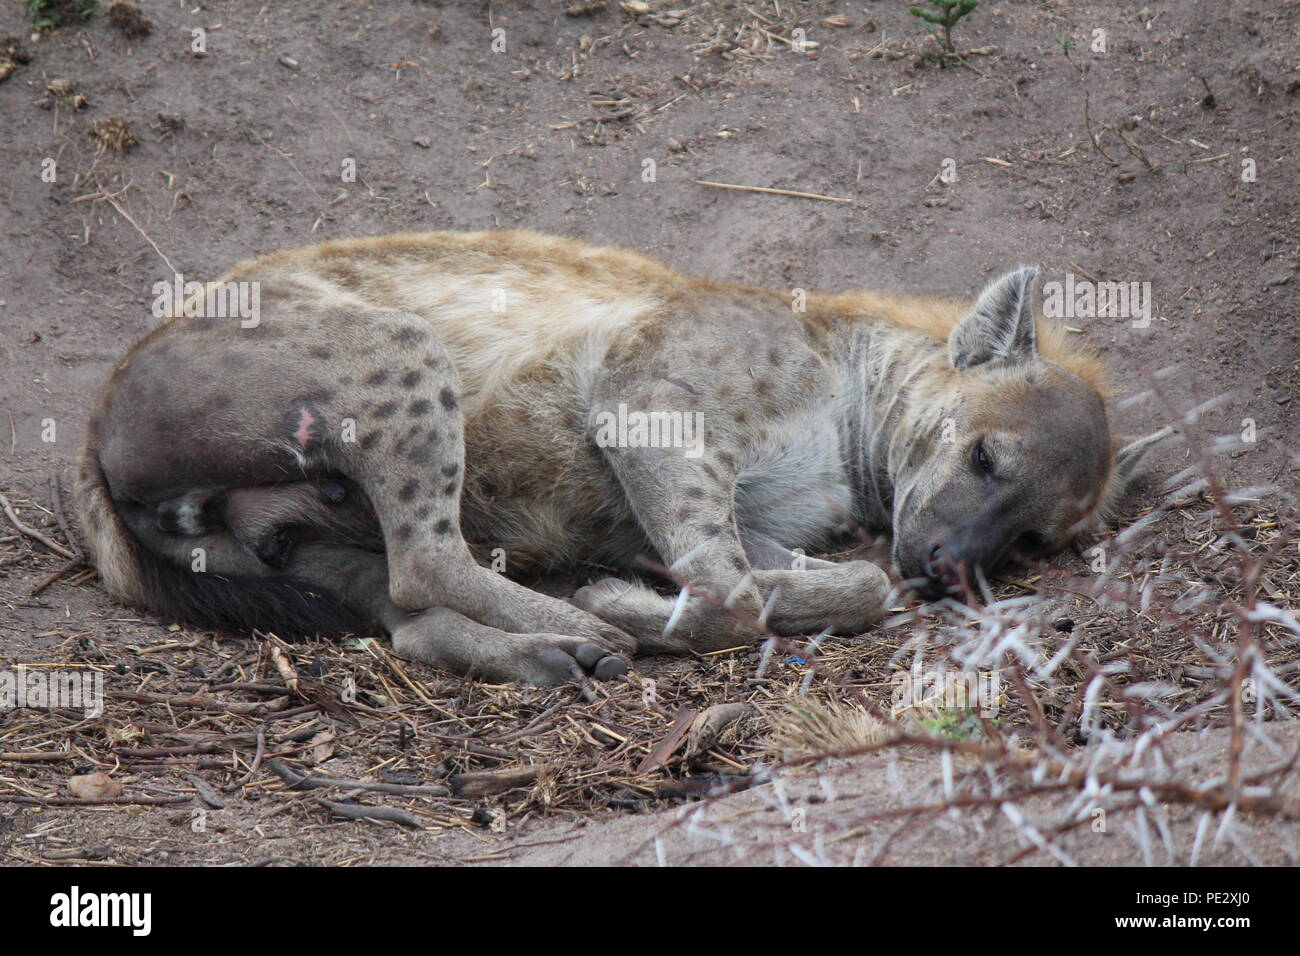 A Hyena in the Kruger Park, South Africa Stock Photo